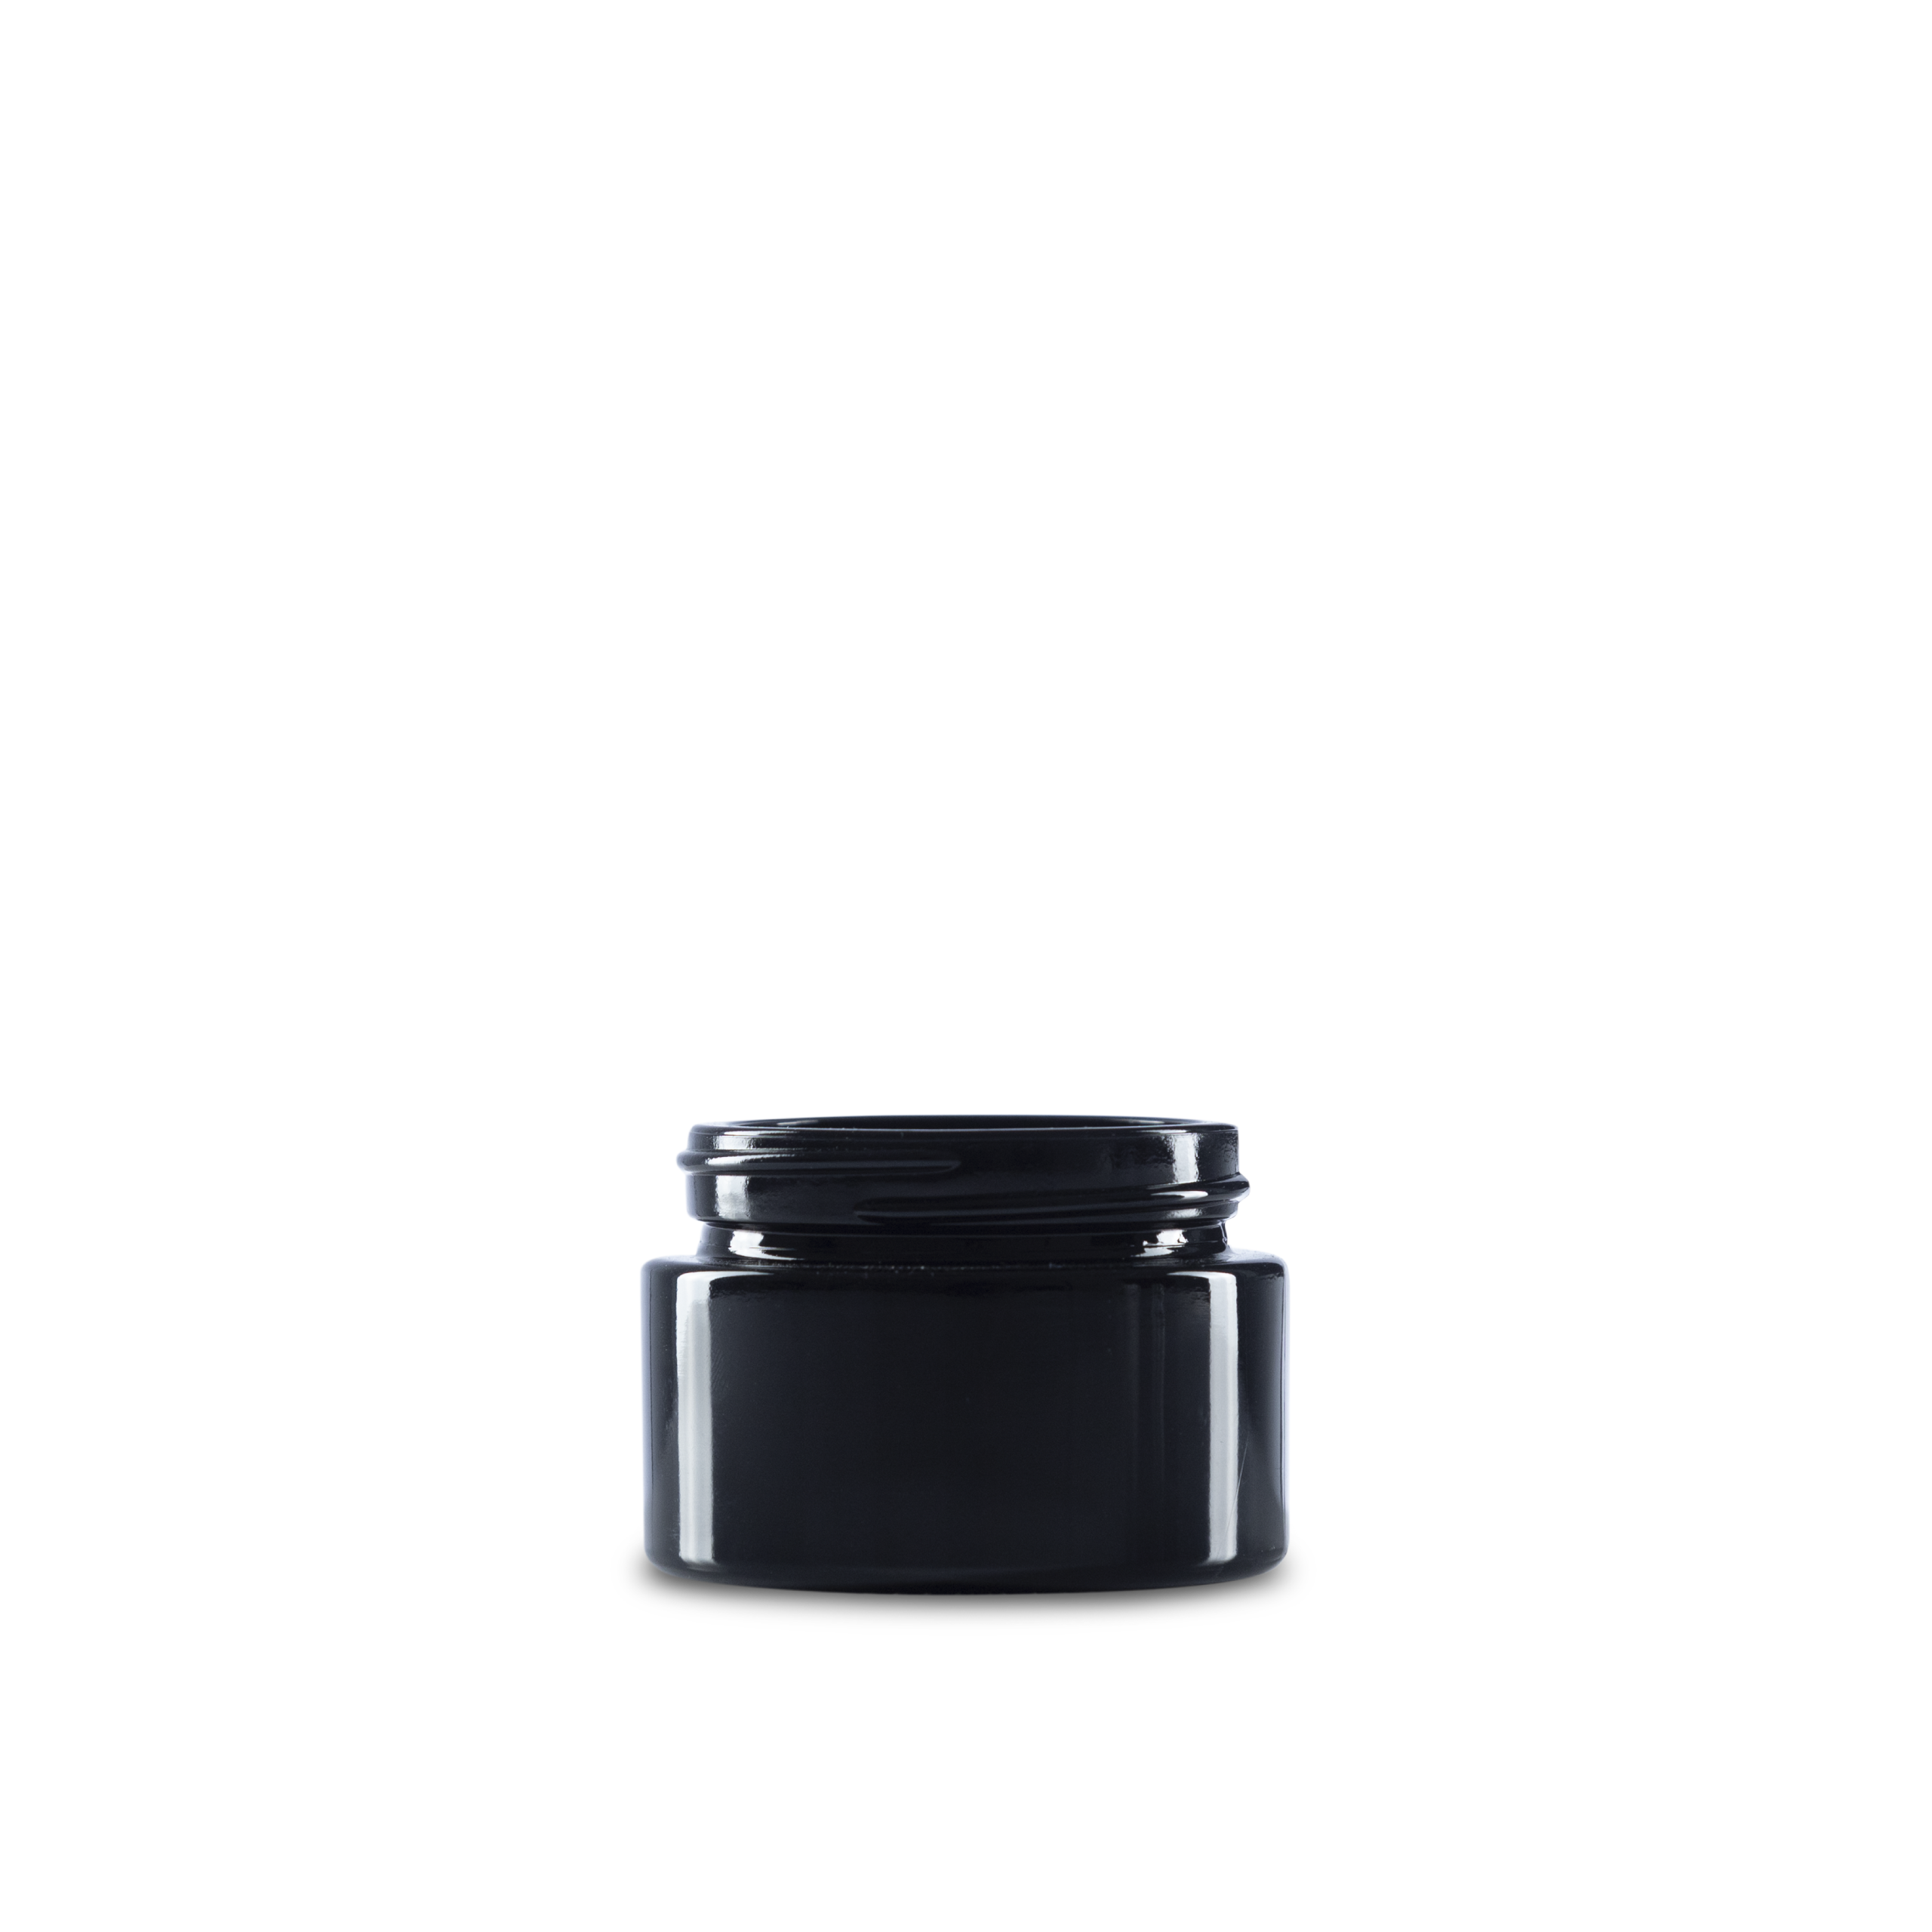 1 oz black uv glass jars can be used for body care products such as lotions, face creams, soaps, and more.